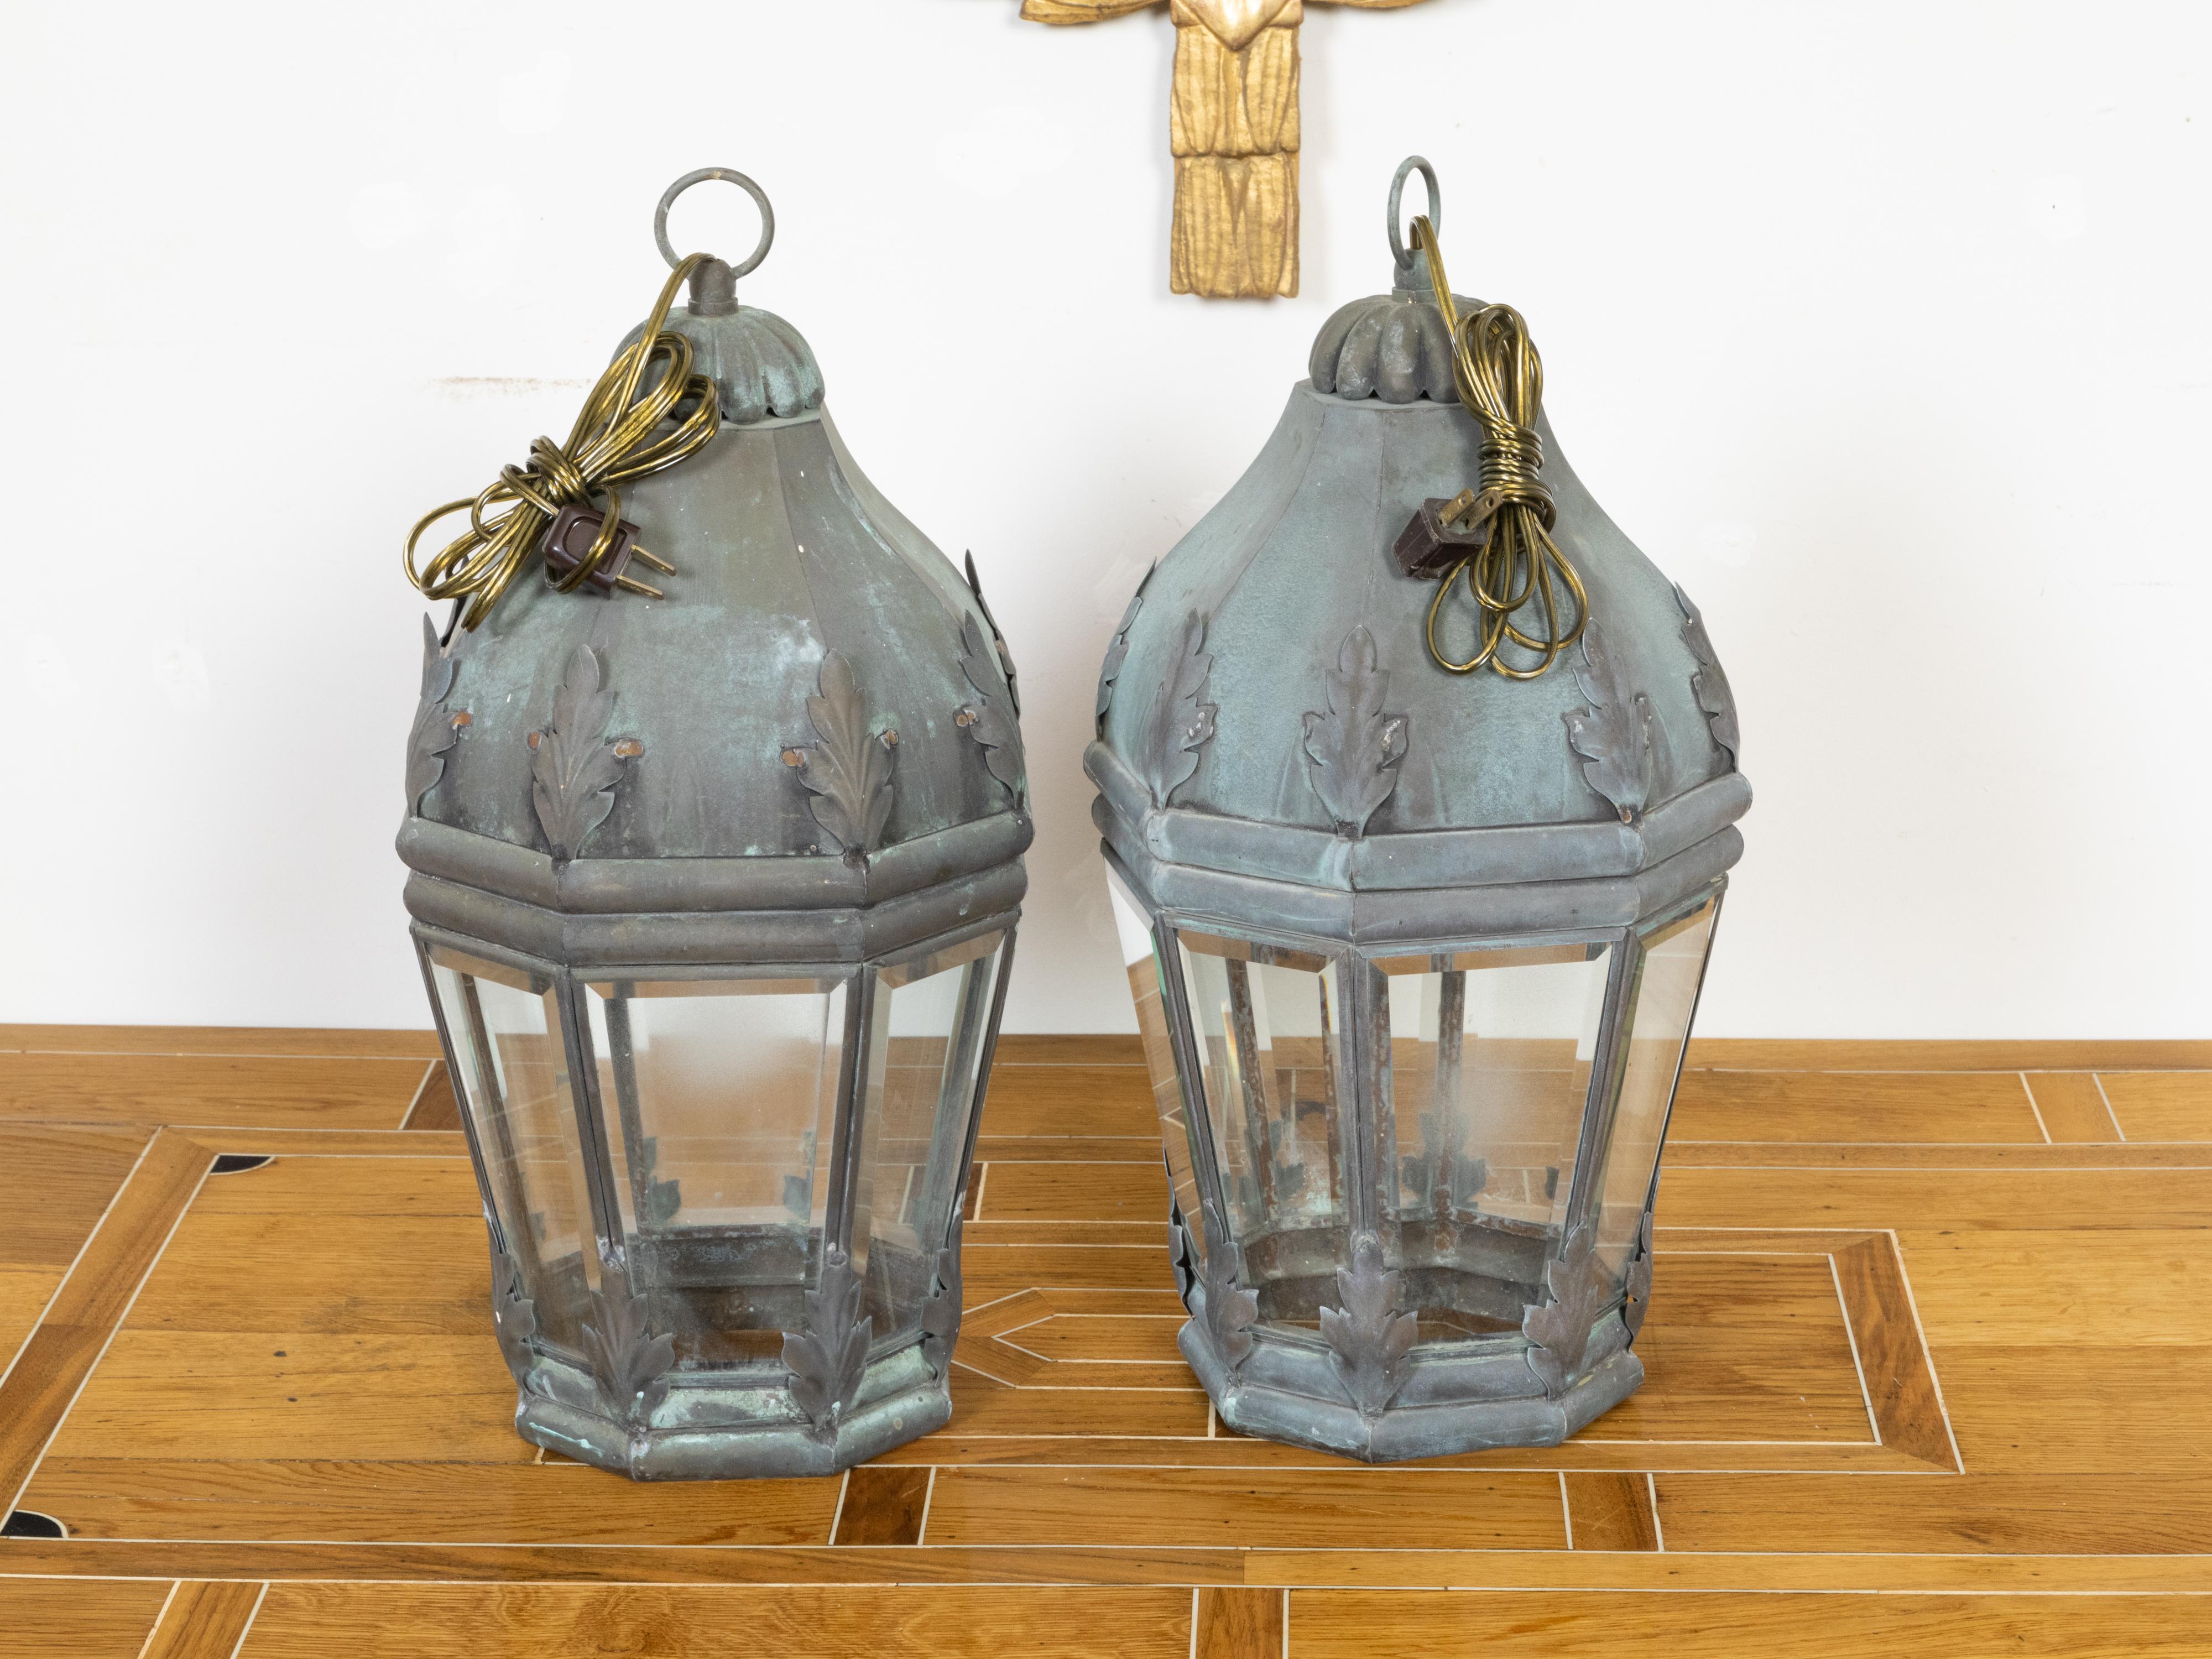 Pair of French 1940s Copper and Glass Lanterns with Verdigris Patina, USA Wired In Good Condition For Sale In Atlanta, GA